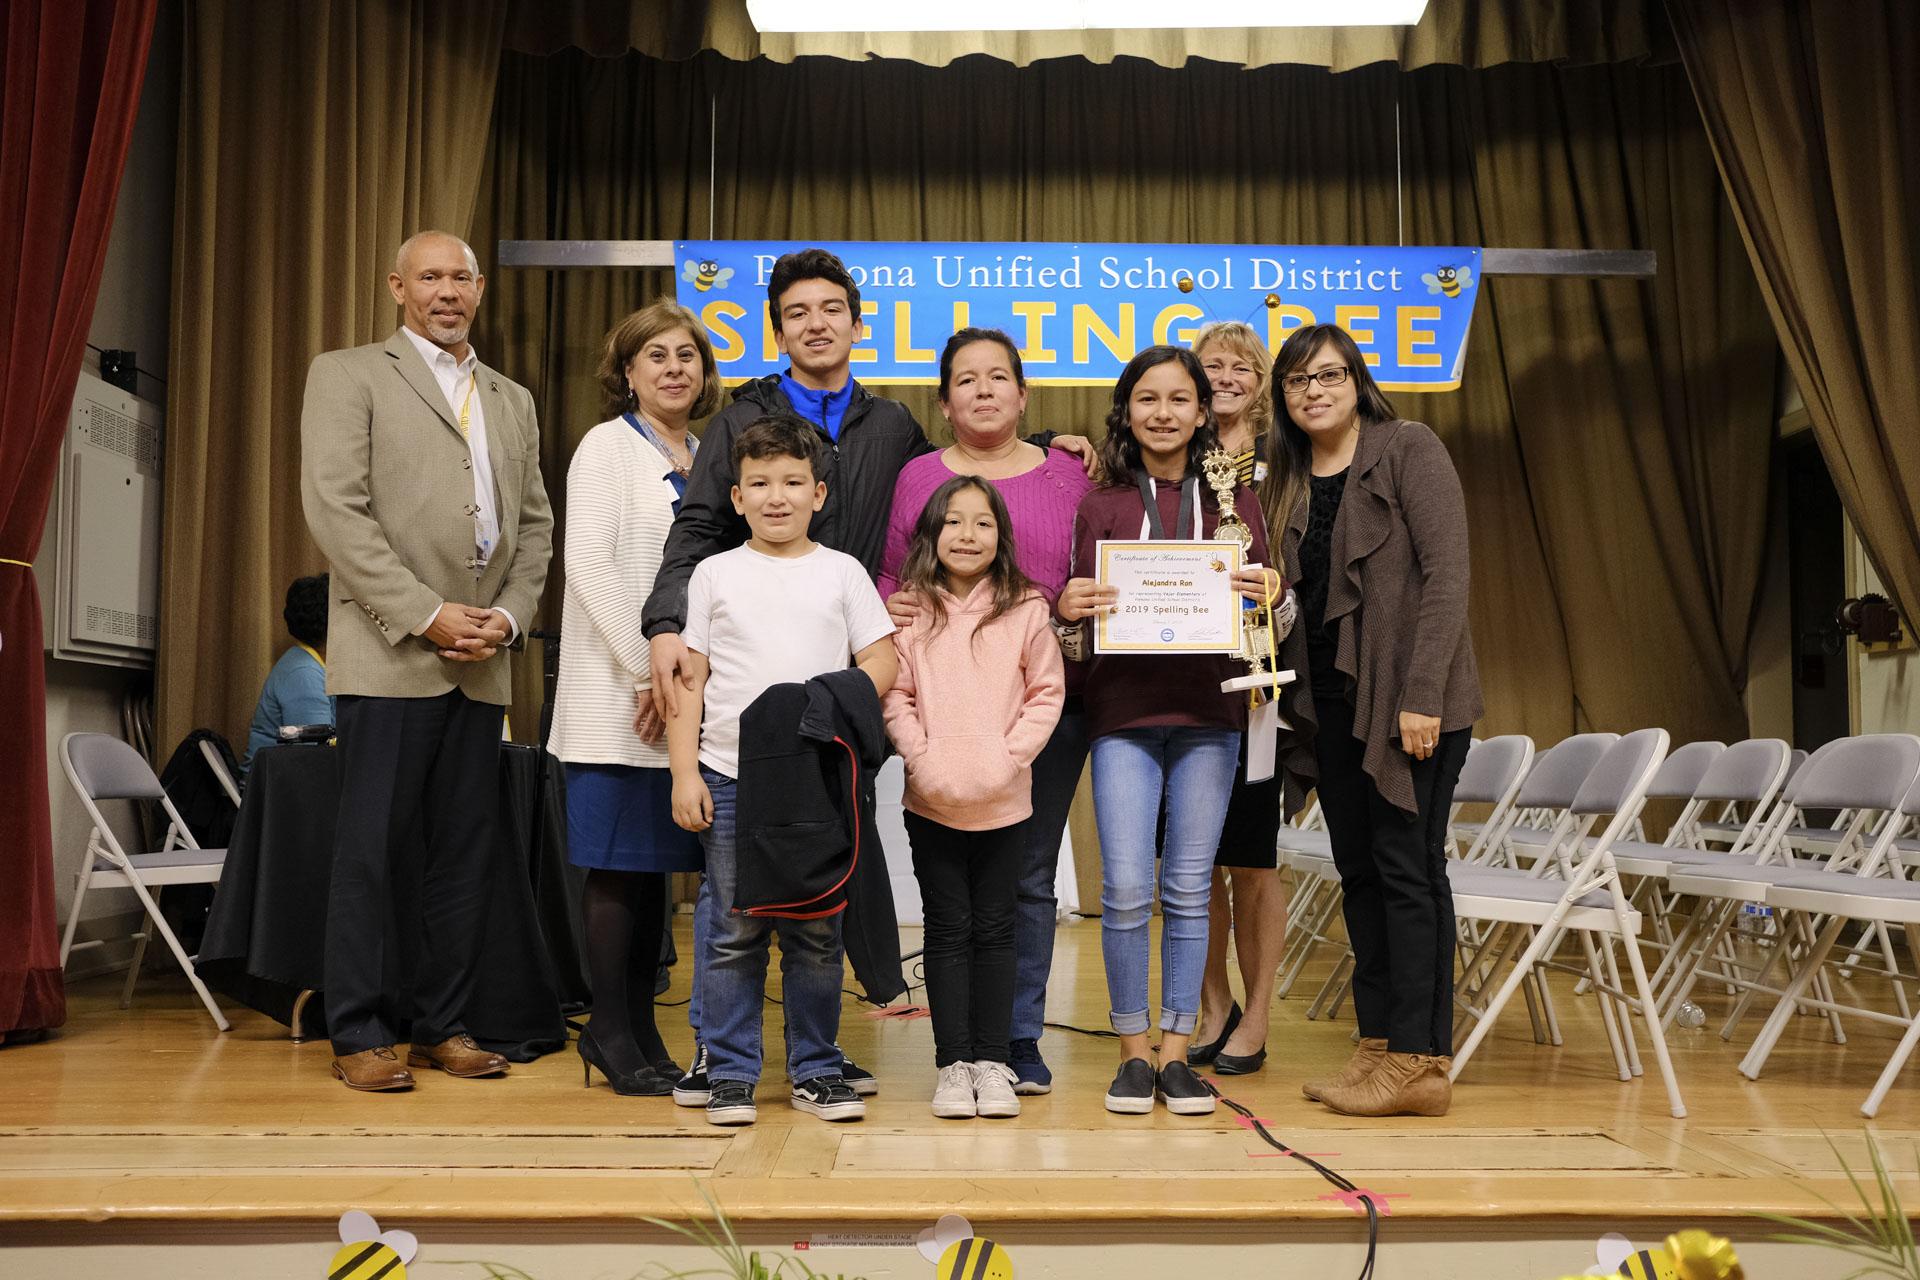 First place winner with her family, the spell master (Delbert Duckins), Lilia Fuentes, her teacher (Claudia Vasquez), and me.